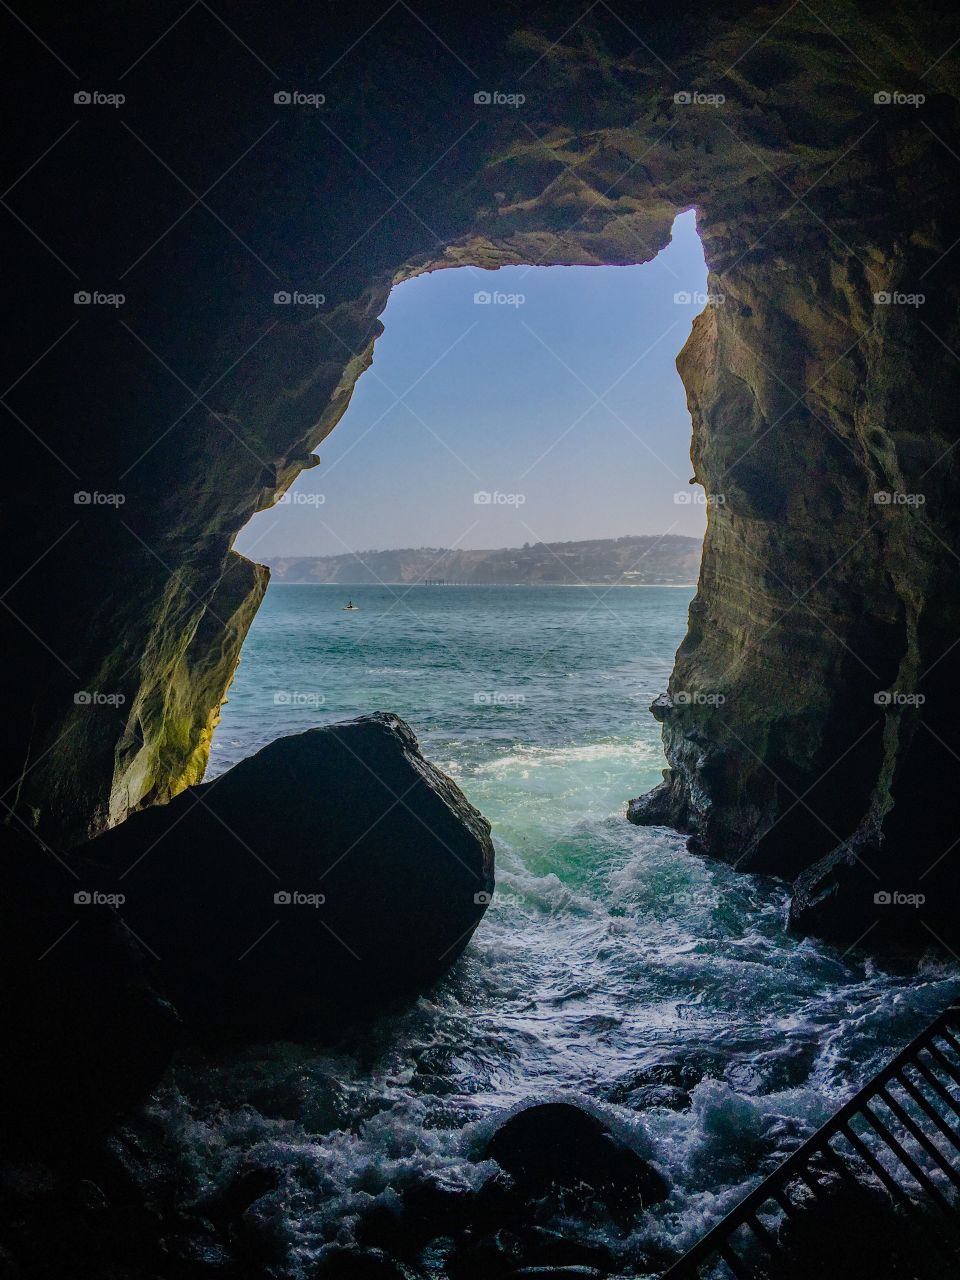 La Jolla, California - Cave opening out into the Pacific Ocean 